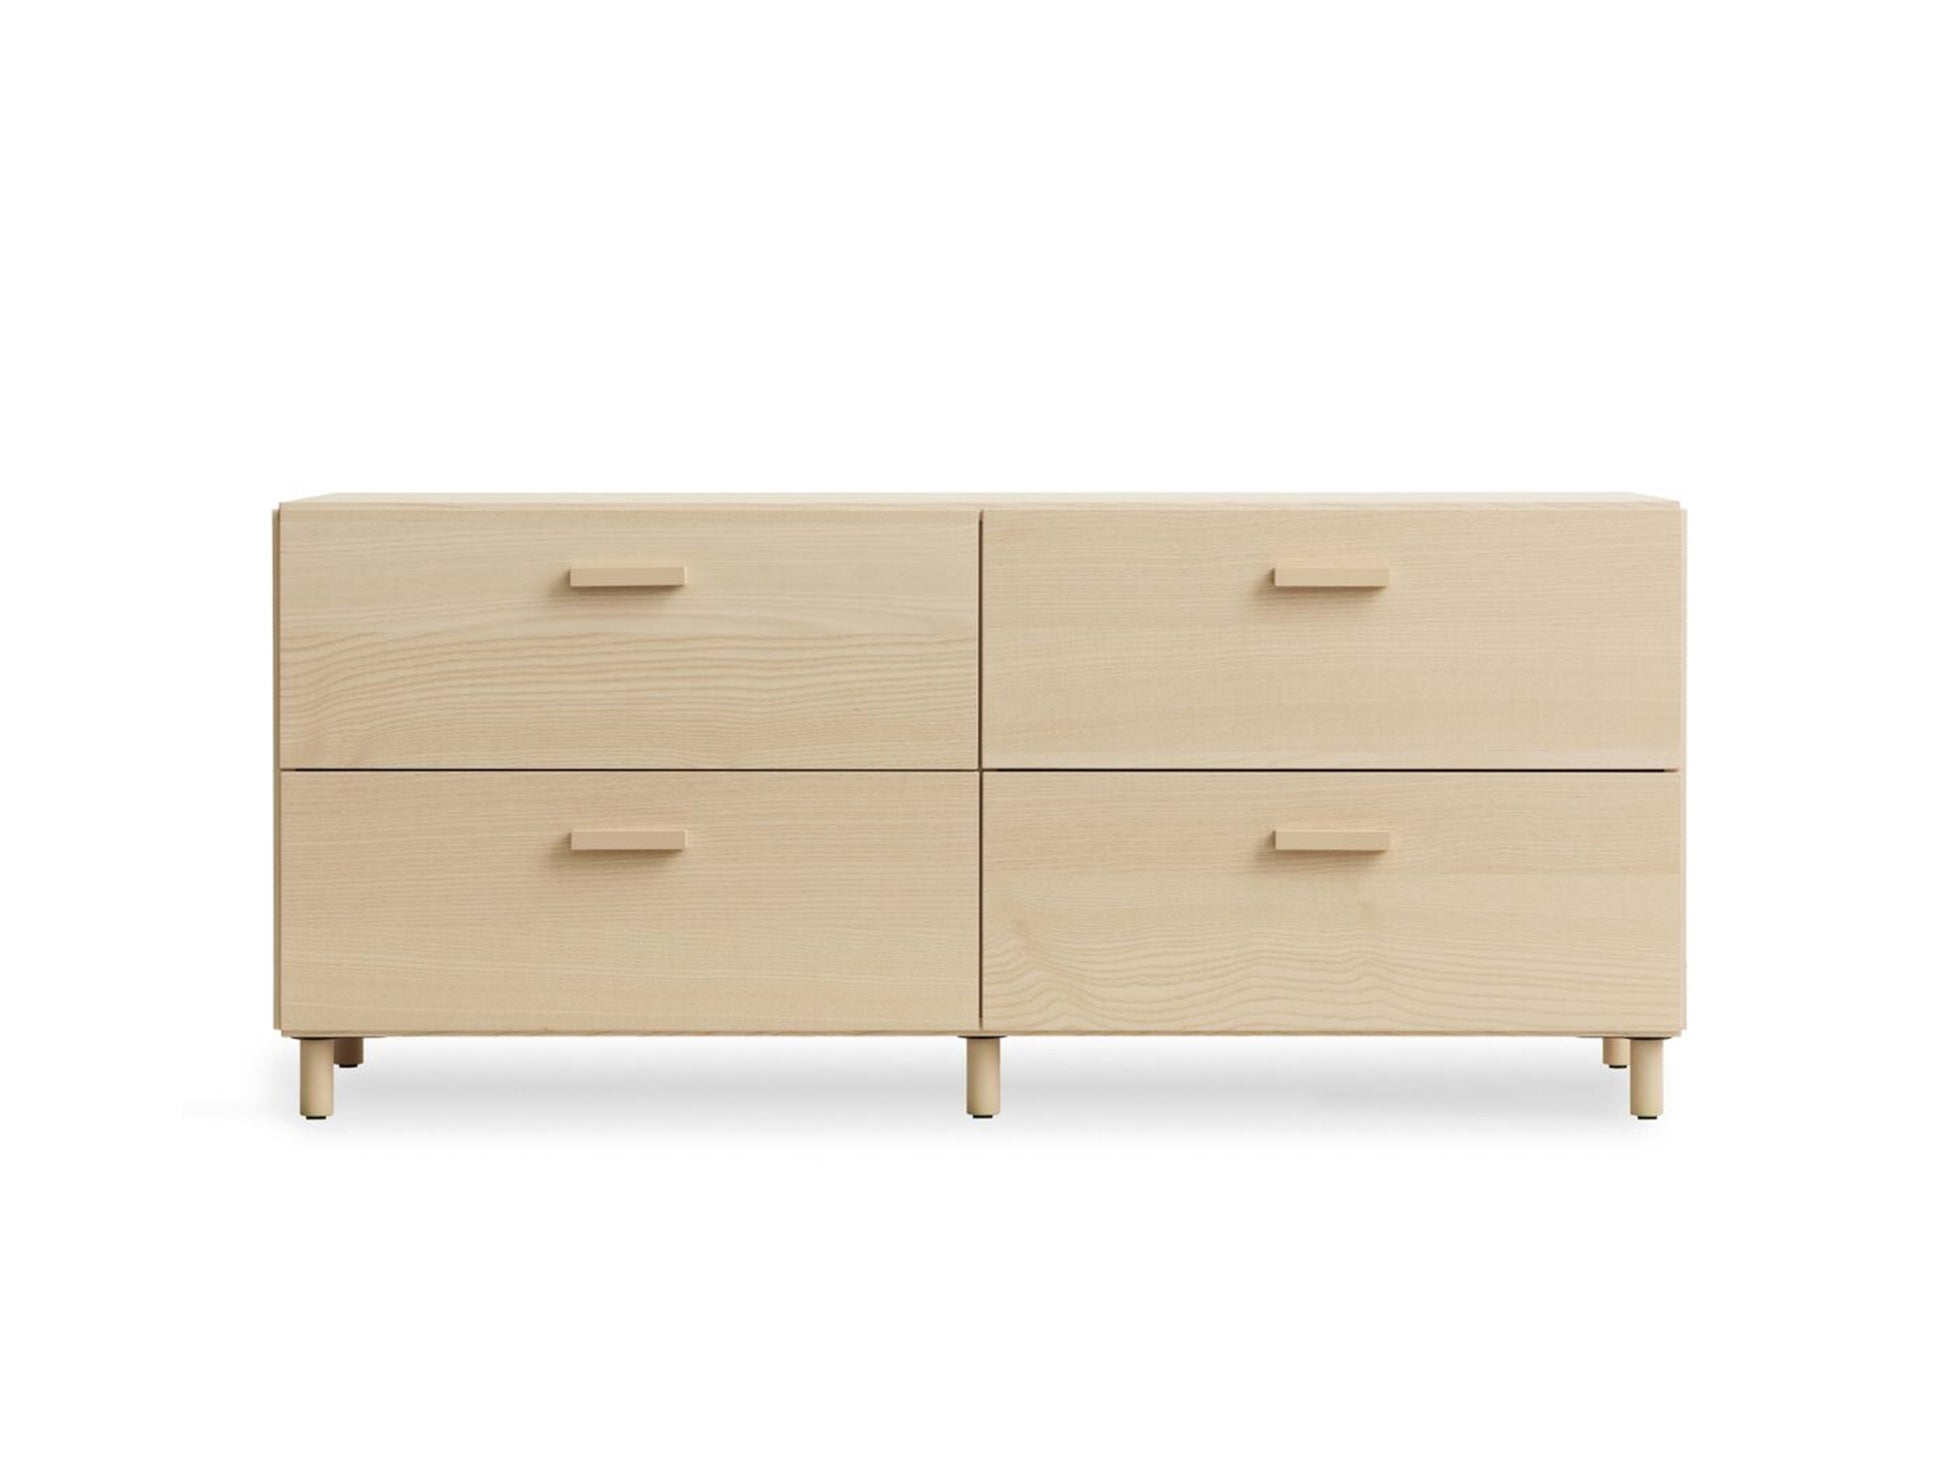 Relief Drawer with Legs- Low by String - Ash